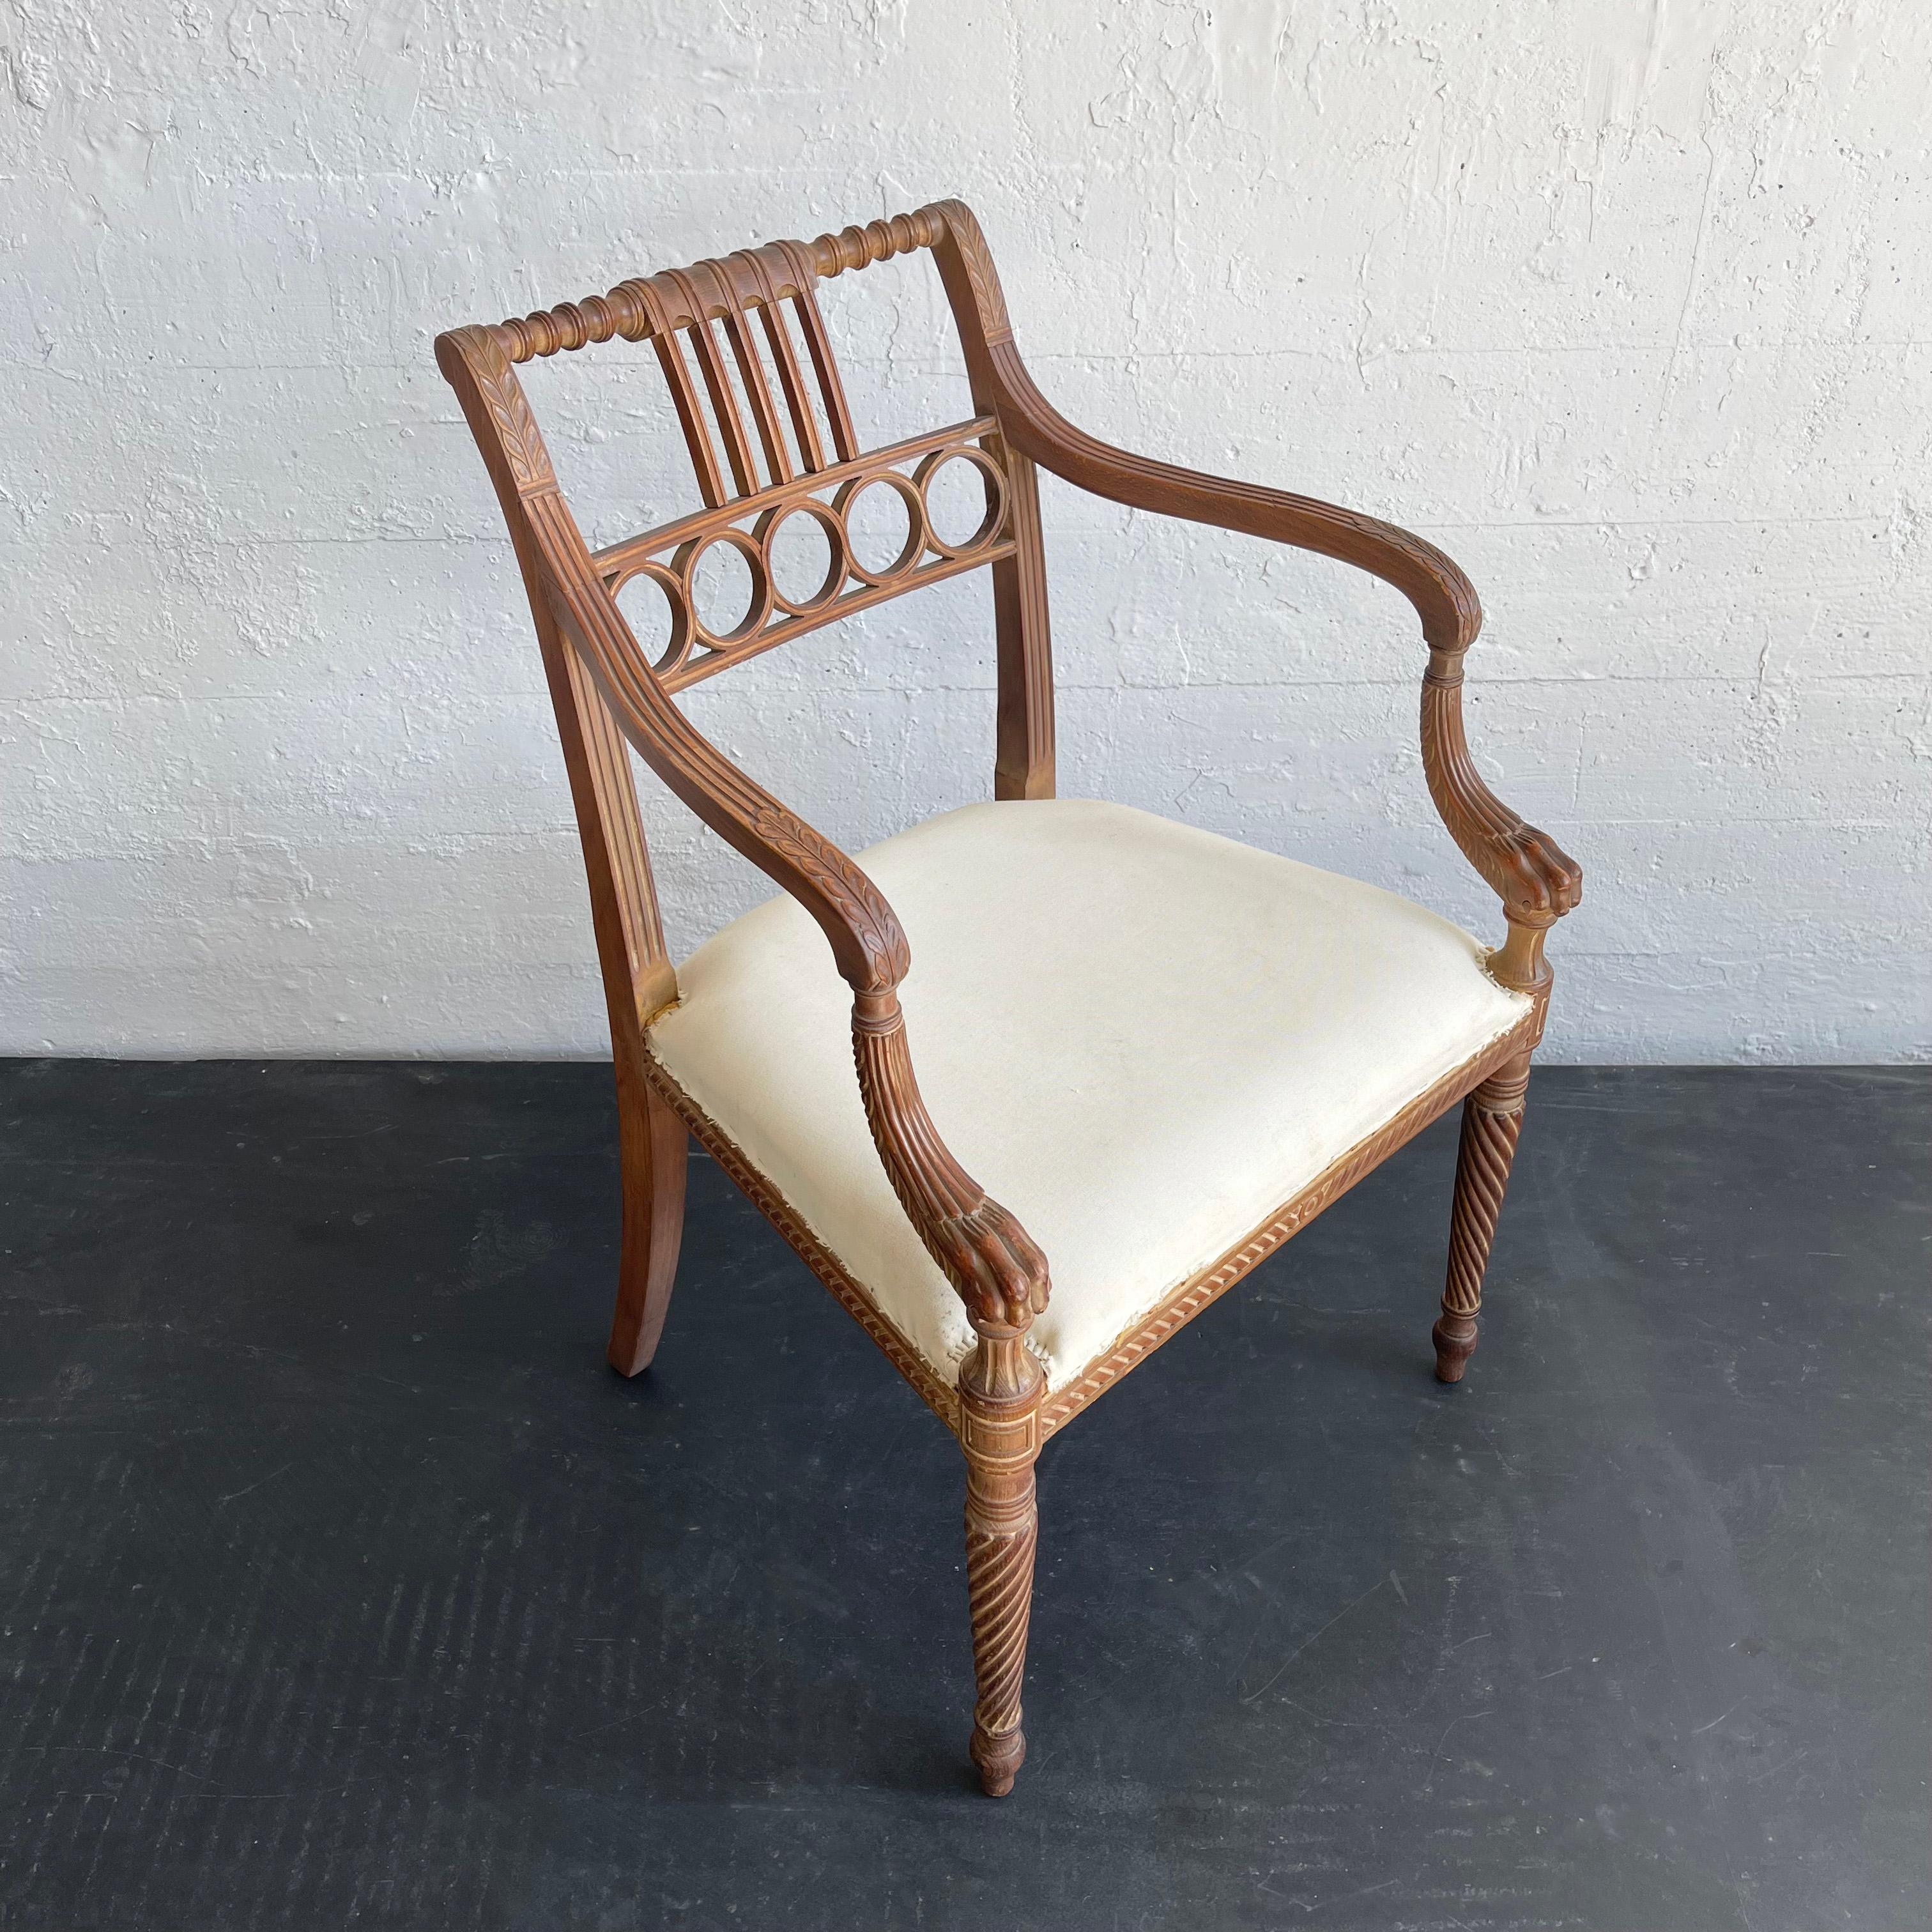 Antique, 19th century, Egyptian Revival, carved maple armchair with horsehair upholstery is a beautiful example of furniture made during America’s second wave of Egyptian Revival which hit during the 1870’s. Furniture designers sought to bring in